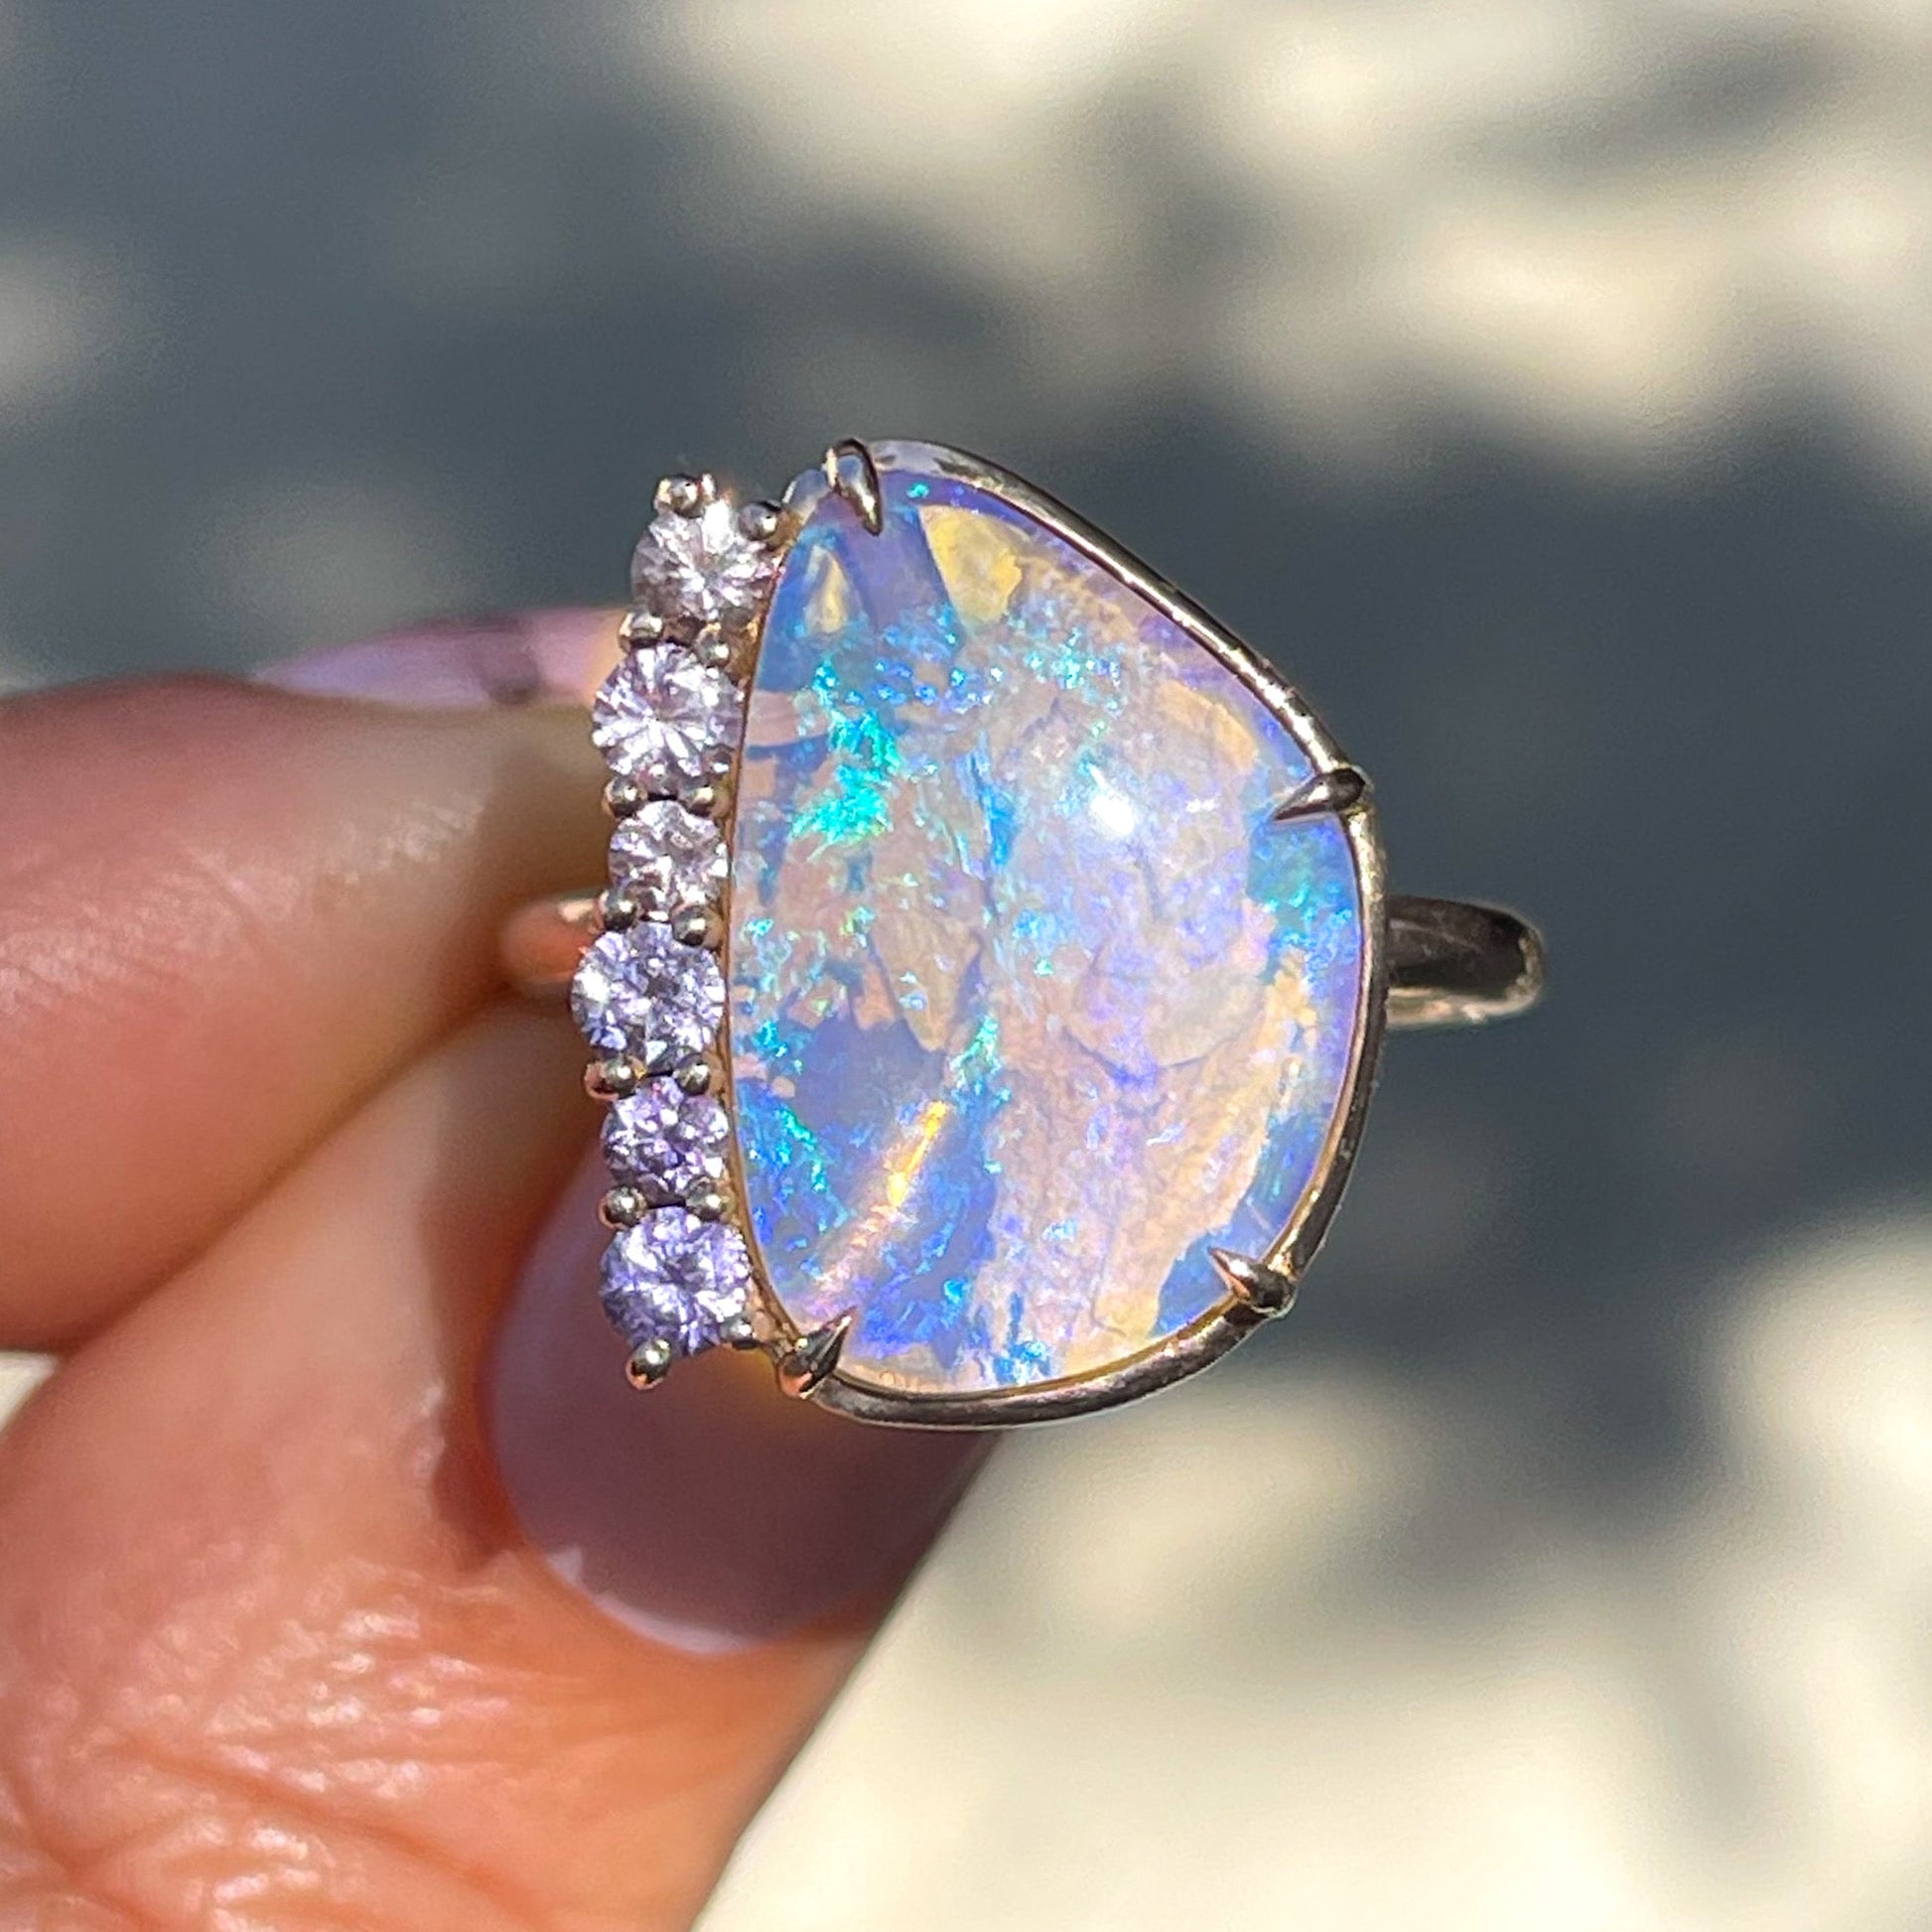 An Australian Opal Ring by NIXIN Jewelry held in sunlight. One of the best opal rings with a Crystal Opal and assorted sized sapphires.